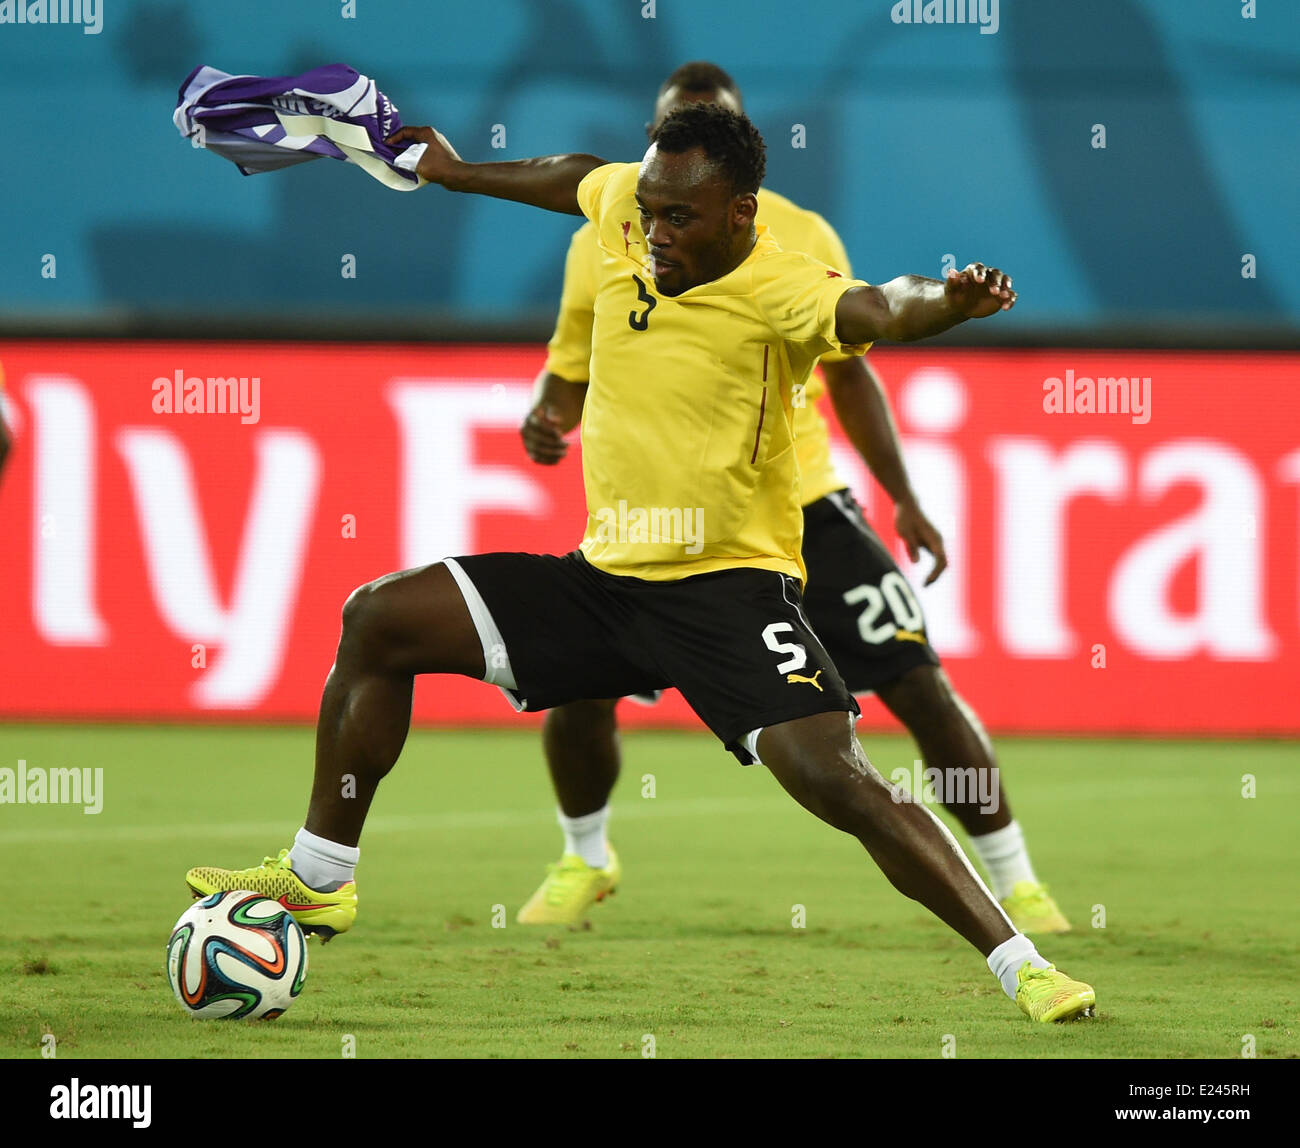 Natal, Brazil. 15th June, 2014. Michael Essien (L) in action during a training session of Ghana's national soccer team at the Arena das Dunas Stadium in Natal, Brazil, 15 June 2014. Ghana will face USA in their group G preliminary round match at the FIFA World Cup 2014 on 16 June 2014 in Natal. Photo: Marius Becker/dpa/Alamy Live News Stock Photo